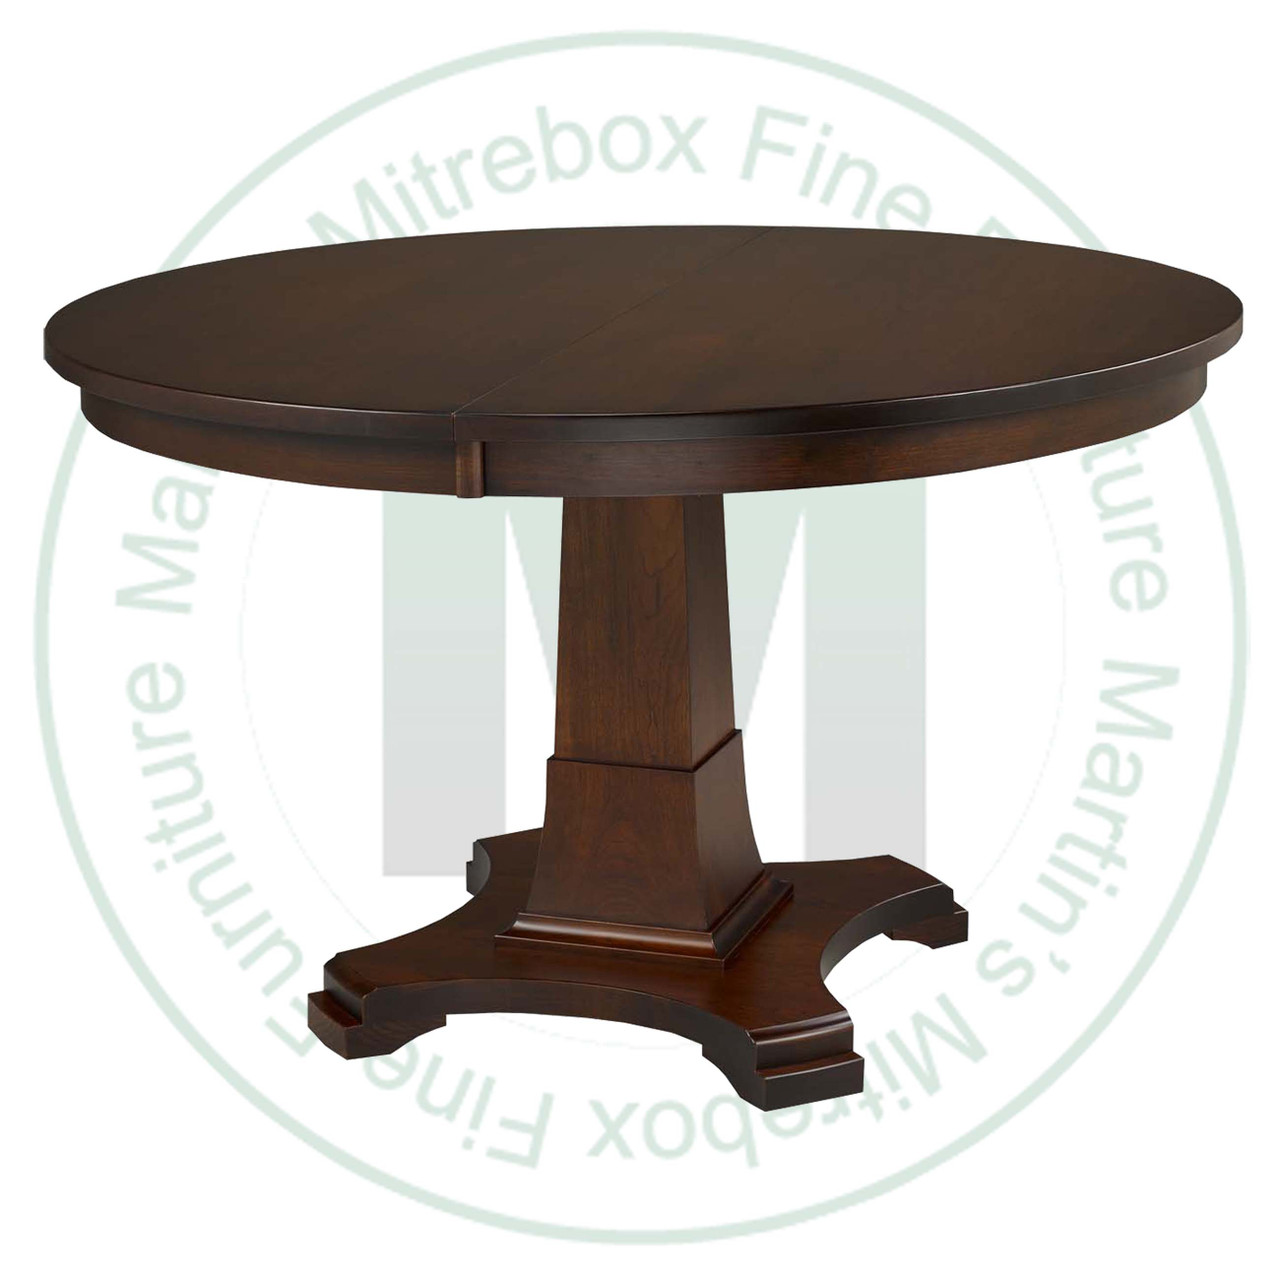 Oak Abbey Single Pedestal Table 36''D x 42''W x 30''H  Round Solid Table. Table Has 1.25'' Thick Top